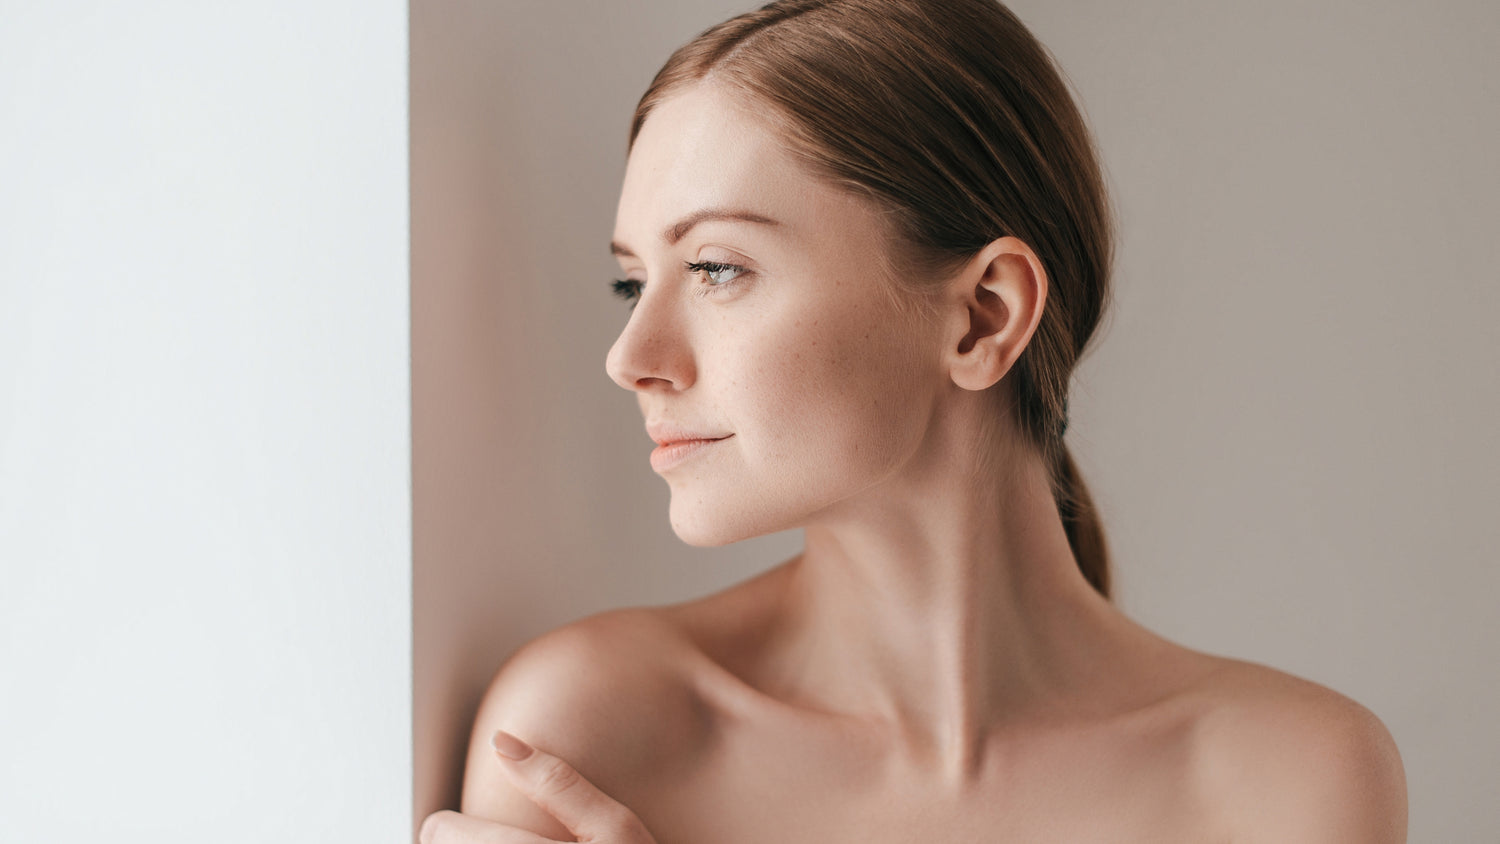 7 Effective Ways to Control Oily Skin and Recover Your Glow